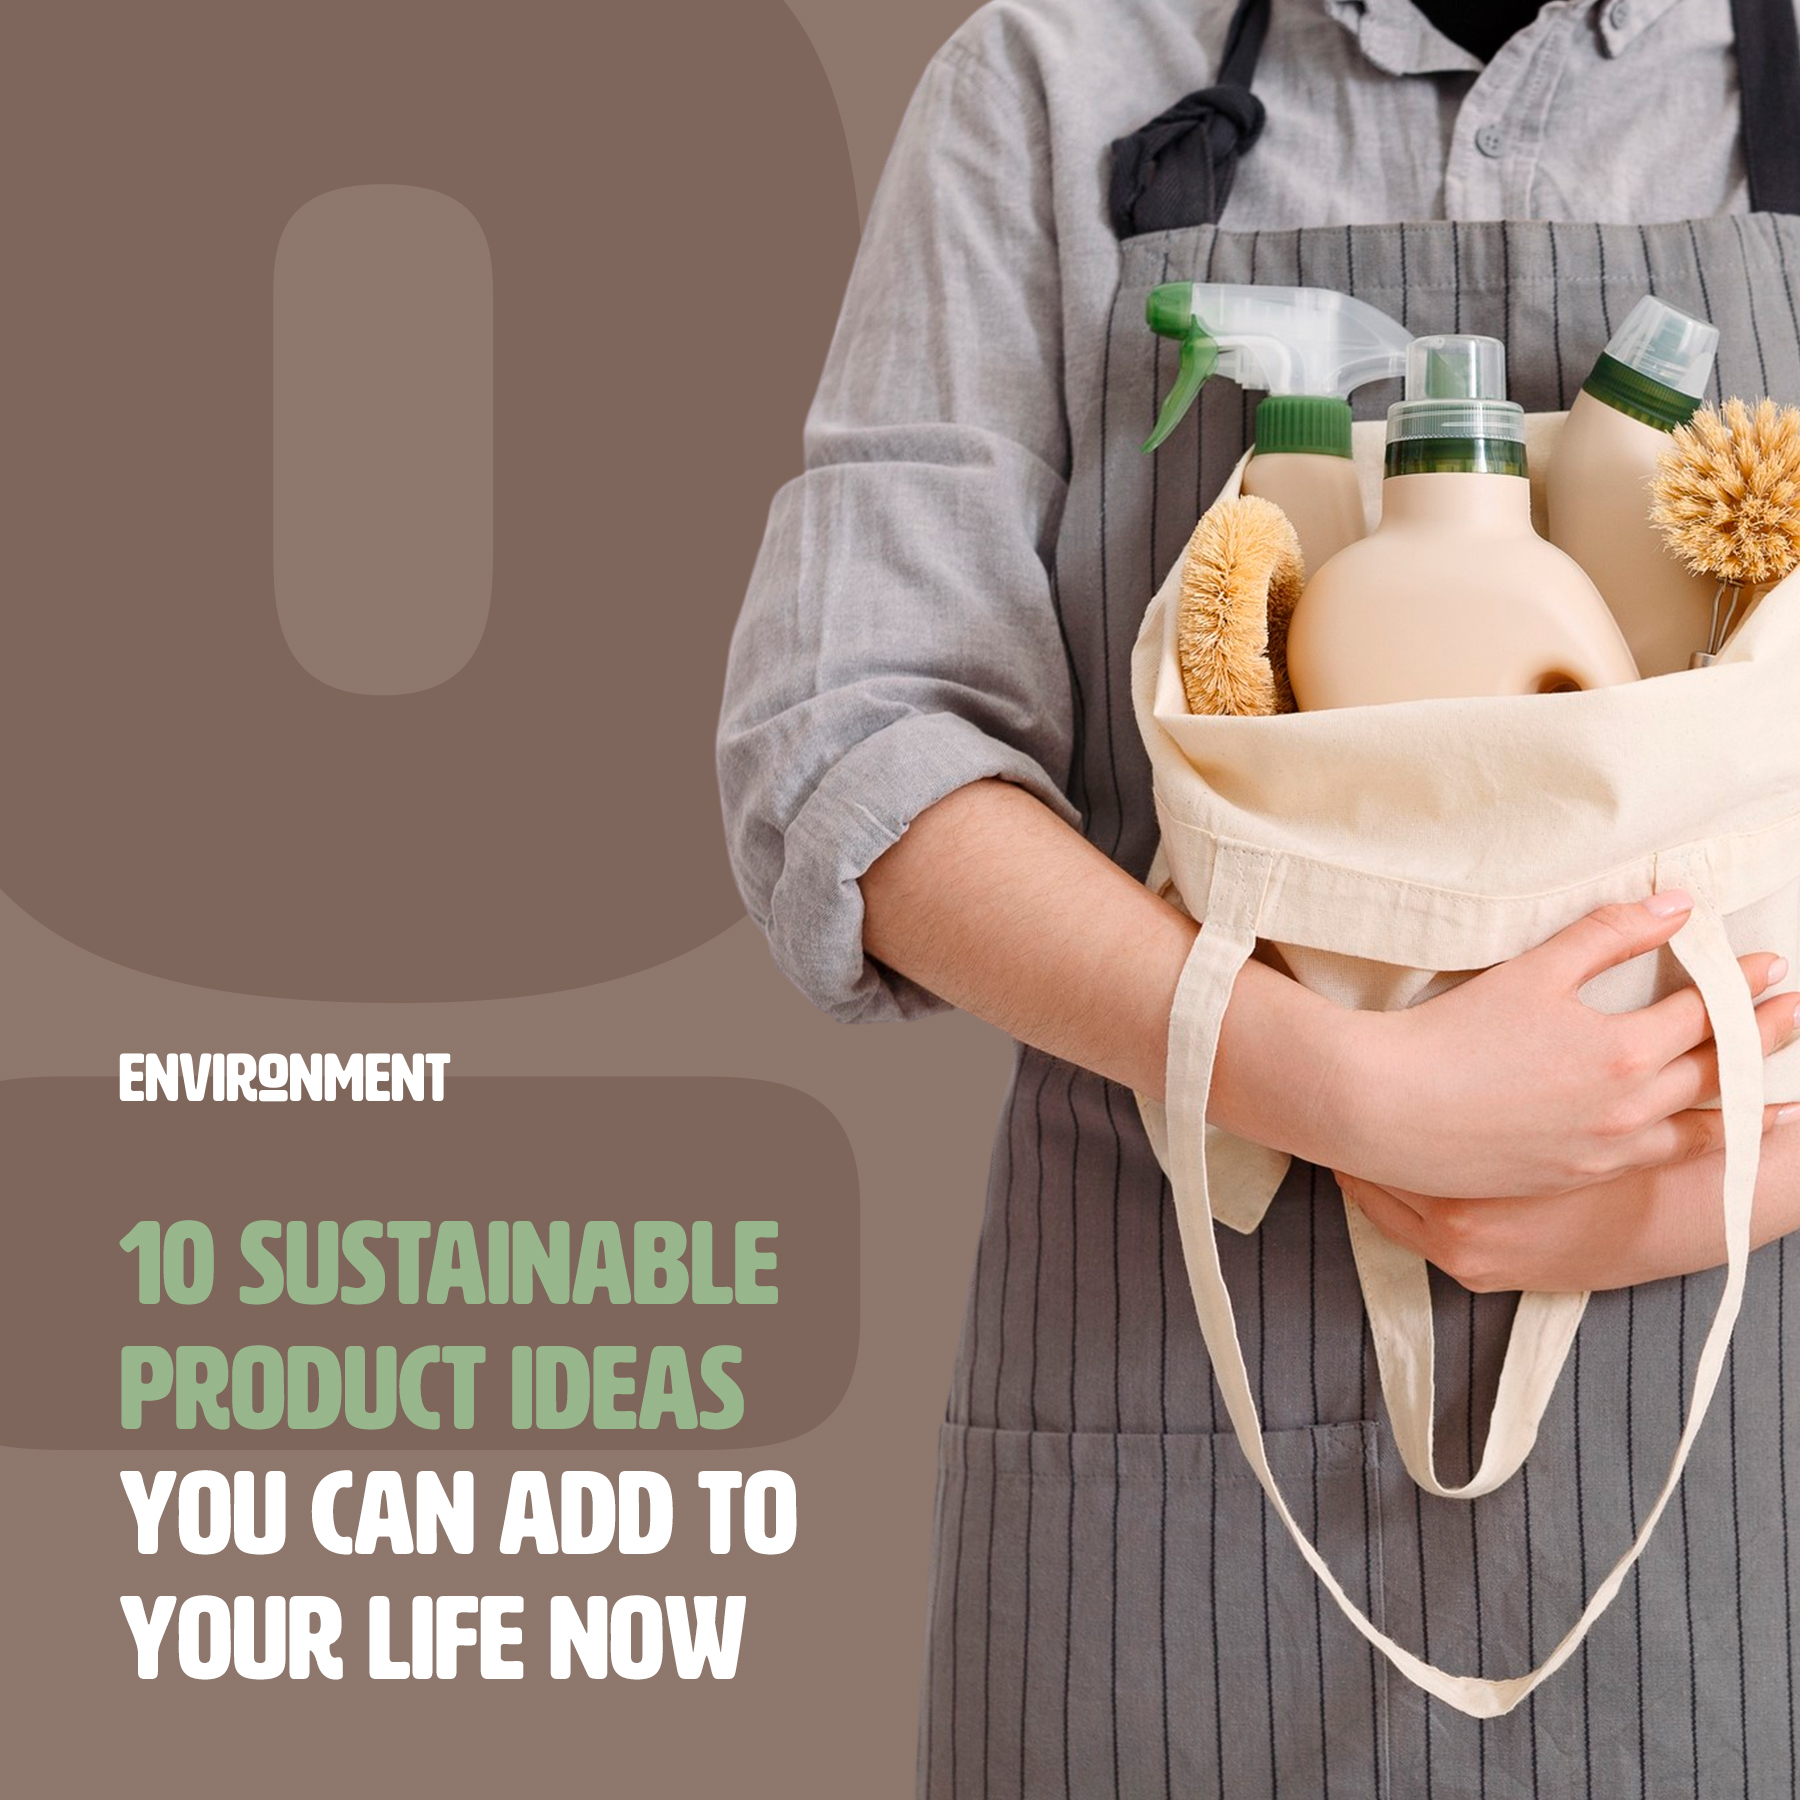 10 Sustainable Product Ideas You Can Add to Your Life Now